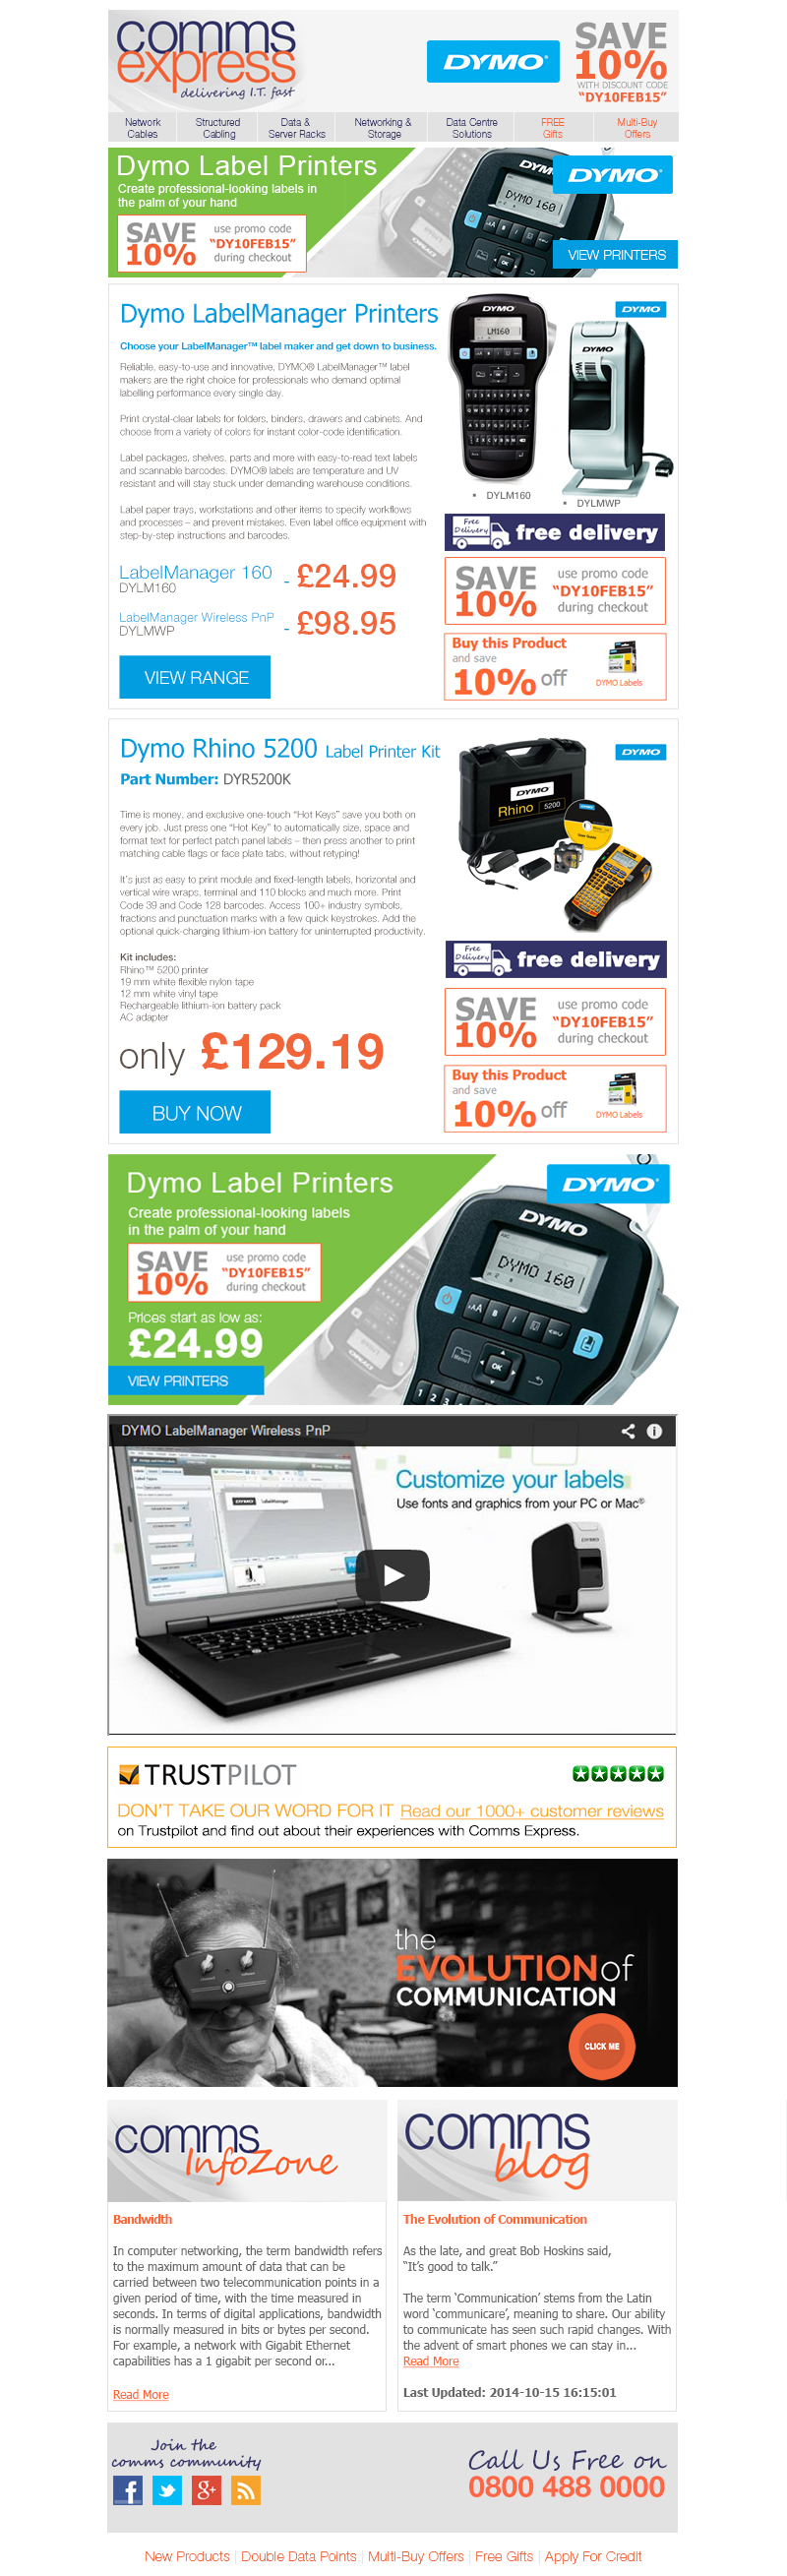 Receive a 10 Percent Discount on DYMO Label Printers